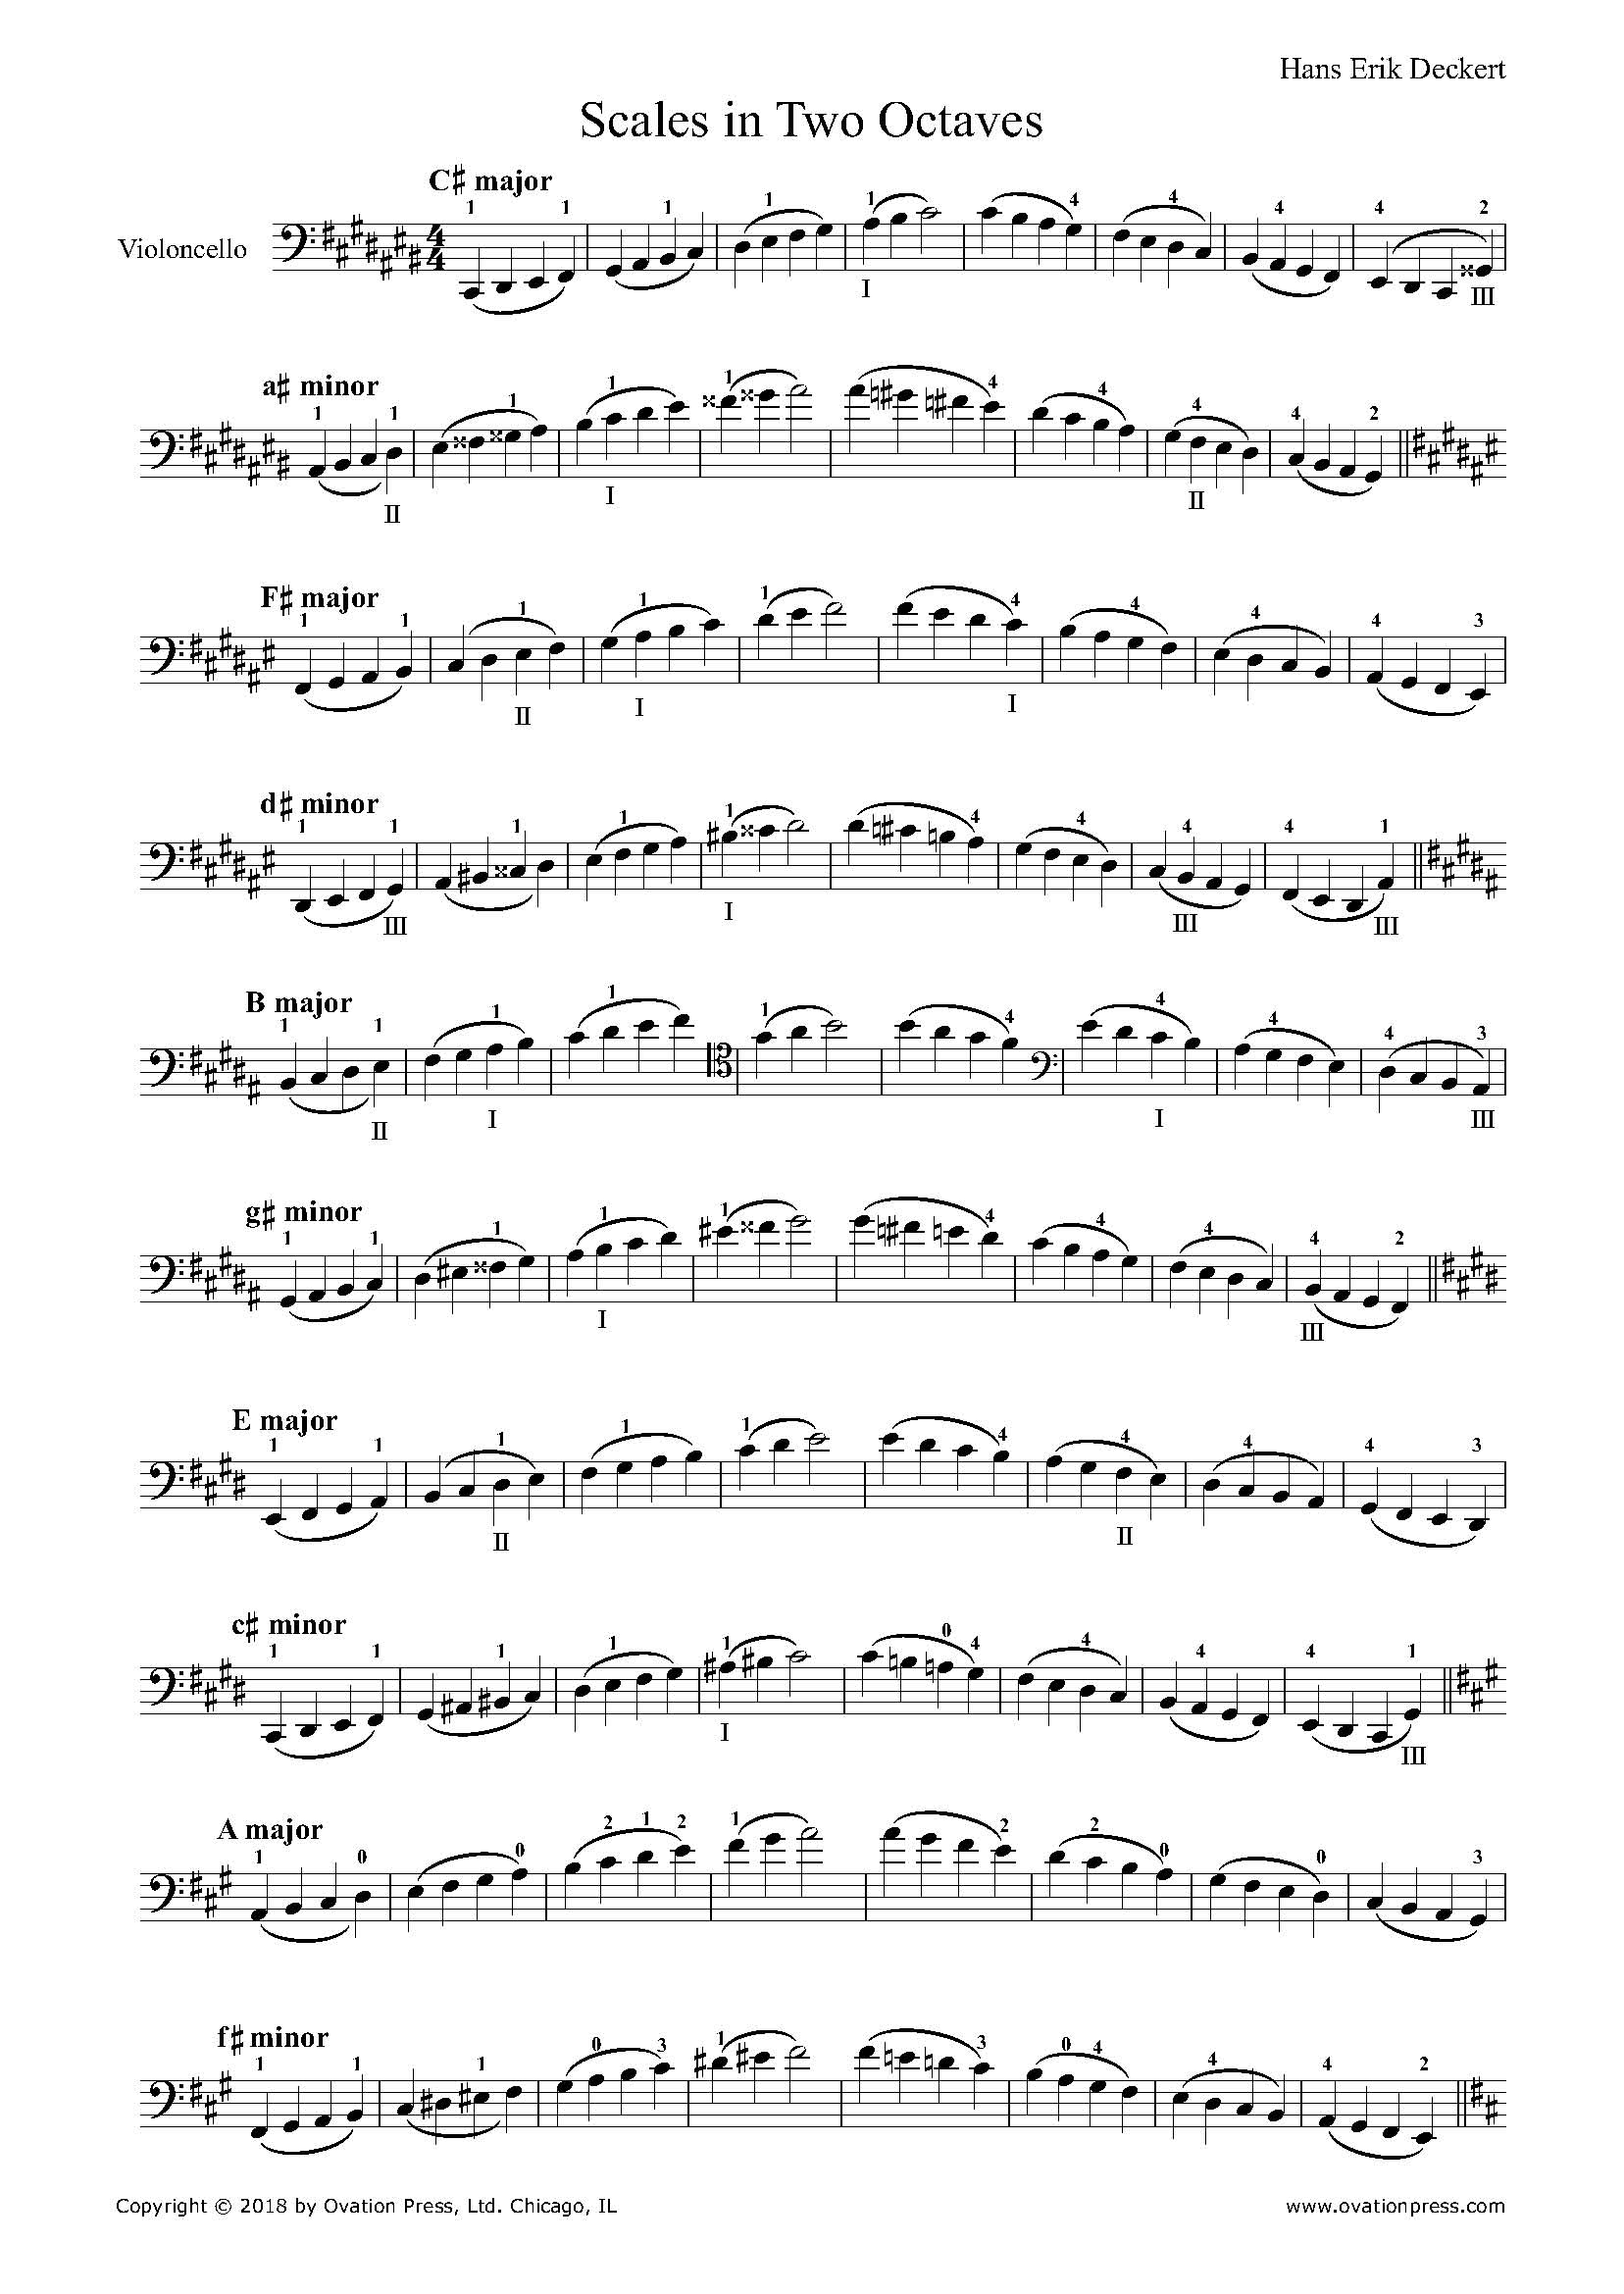 d flat major scale cello 3 octaves